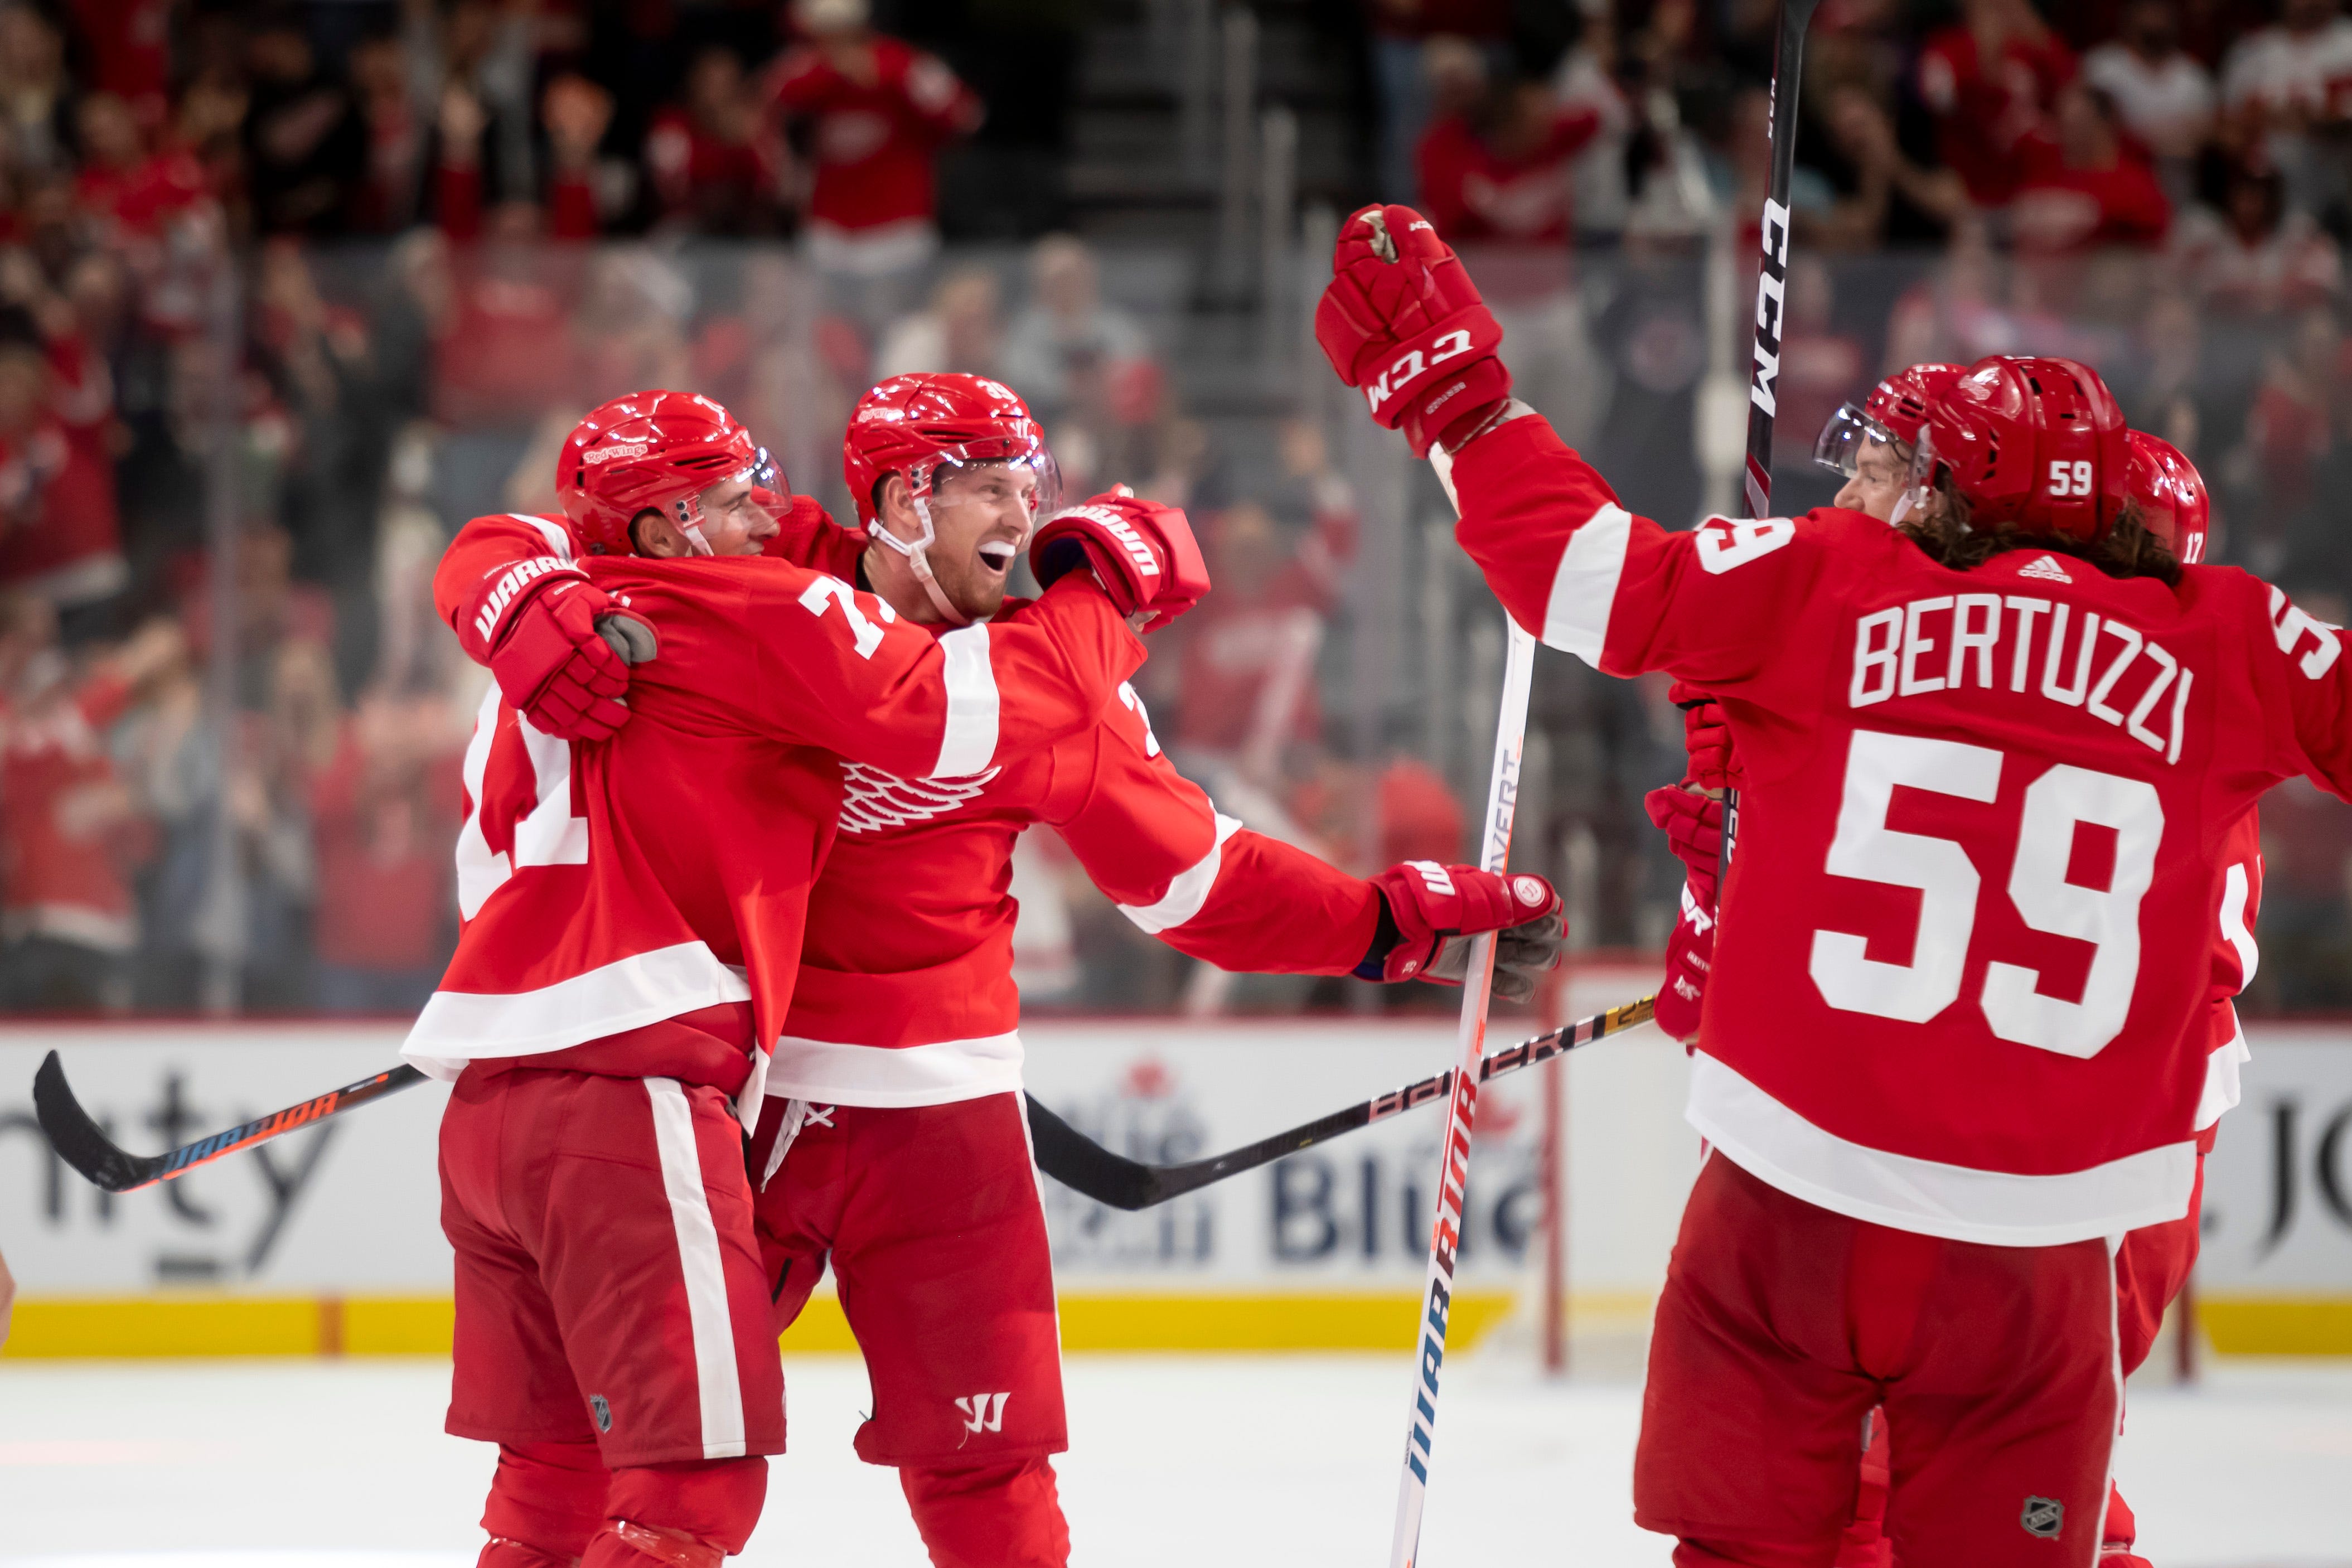 From left, Detroit center Dylan Larkin, right wing Anthony Mantha and the rest of the Red Wings celebrate Mantha's fourth goal of the game in the third period.